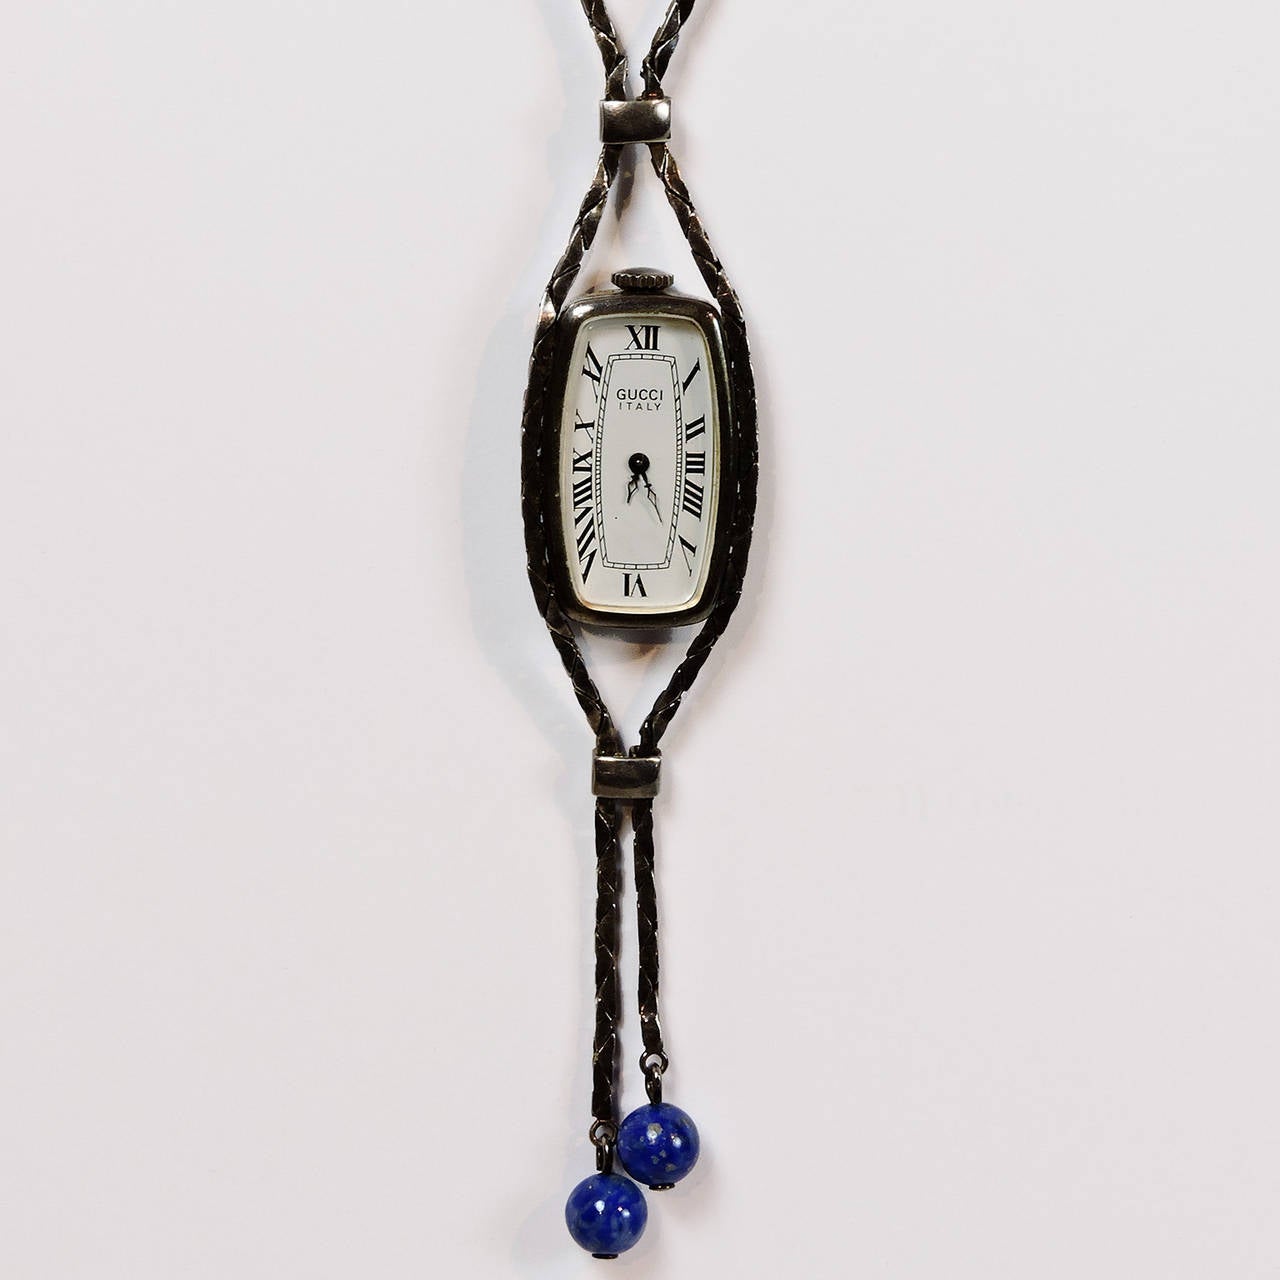 Vintage Gucci Silver and Lapis Lazuli Pendant Watch Necklace.  Perfect length for today's fashion! Marked Gucci Italy 925.
Chain length: 18 inches (clasped)